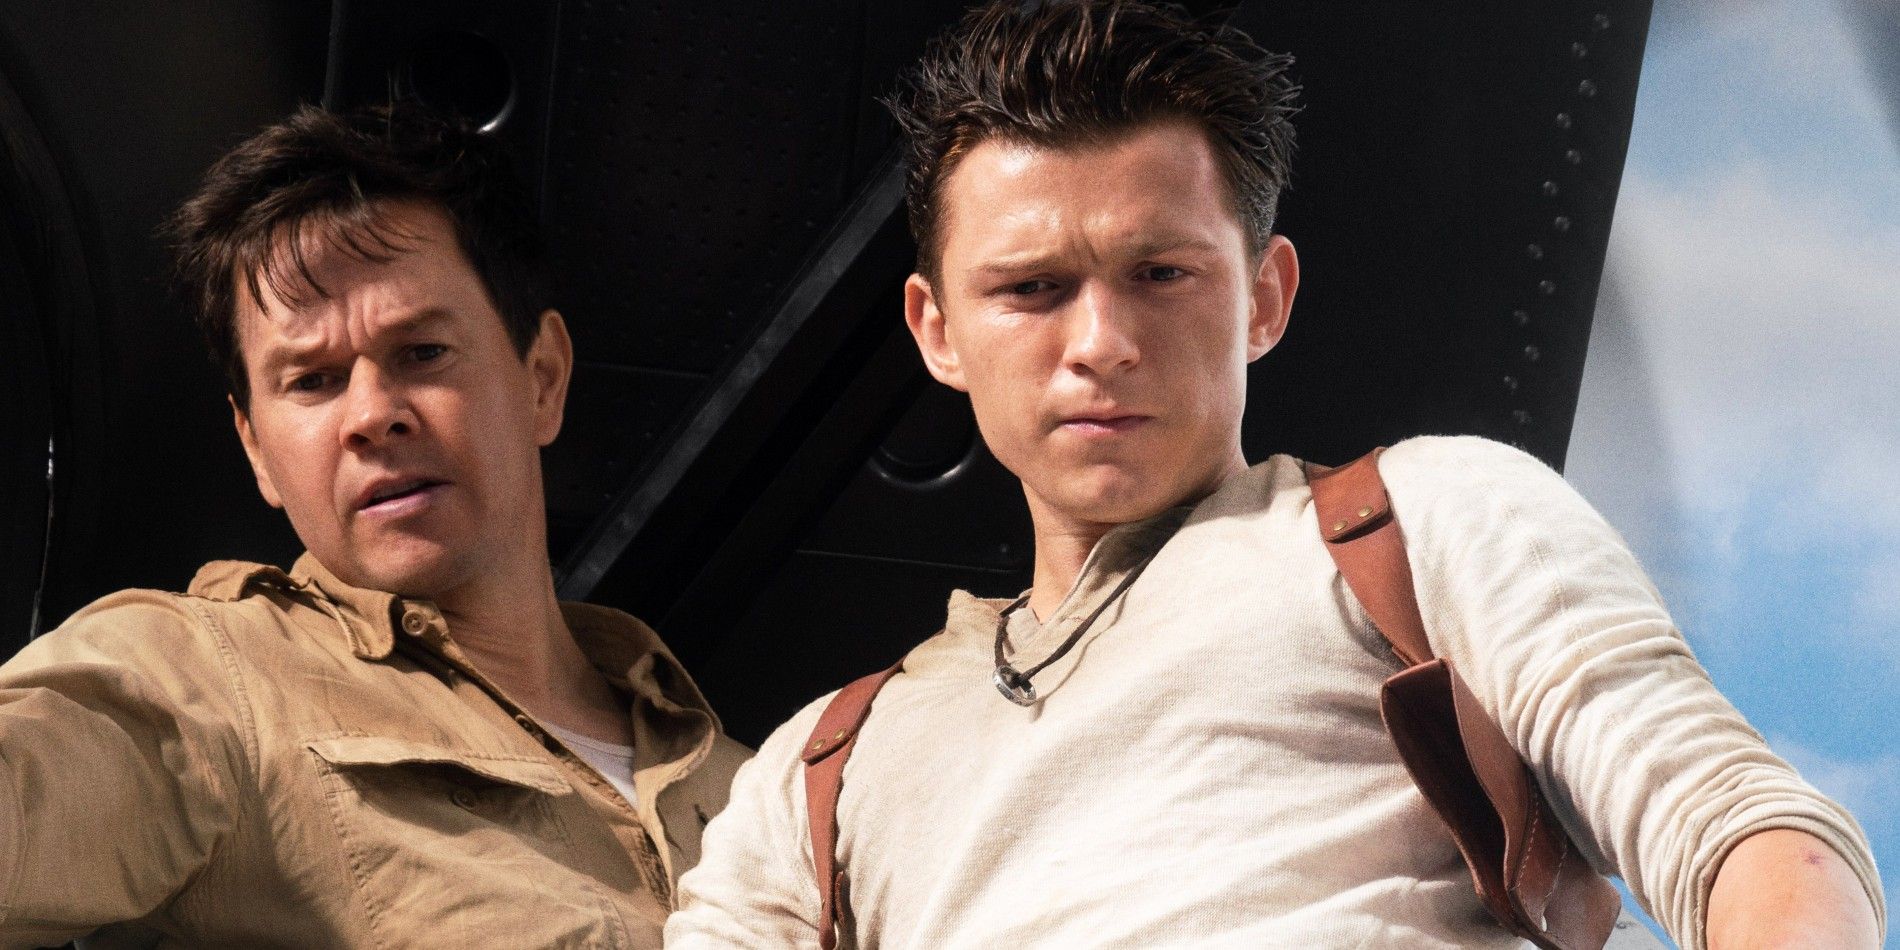 Finding The Right Uncharted Director Was Stressful, Says Tom Holland